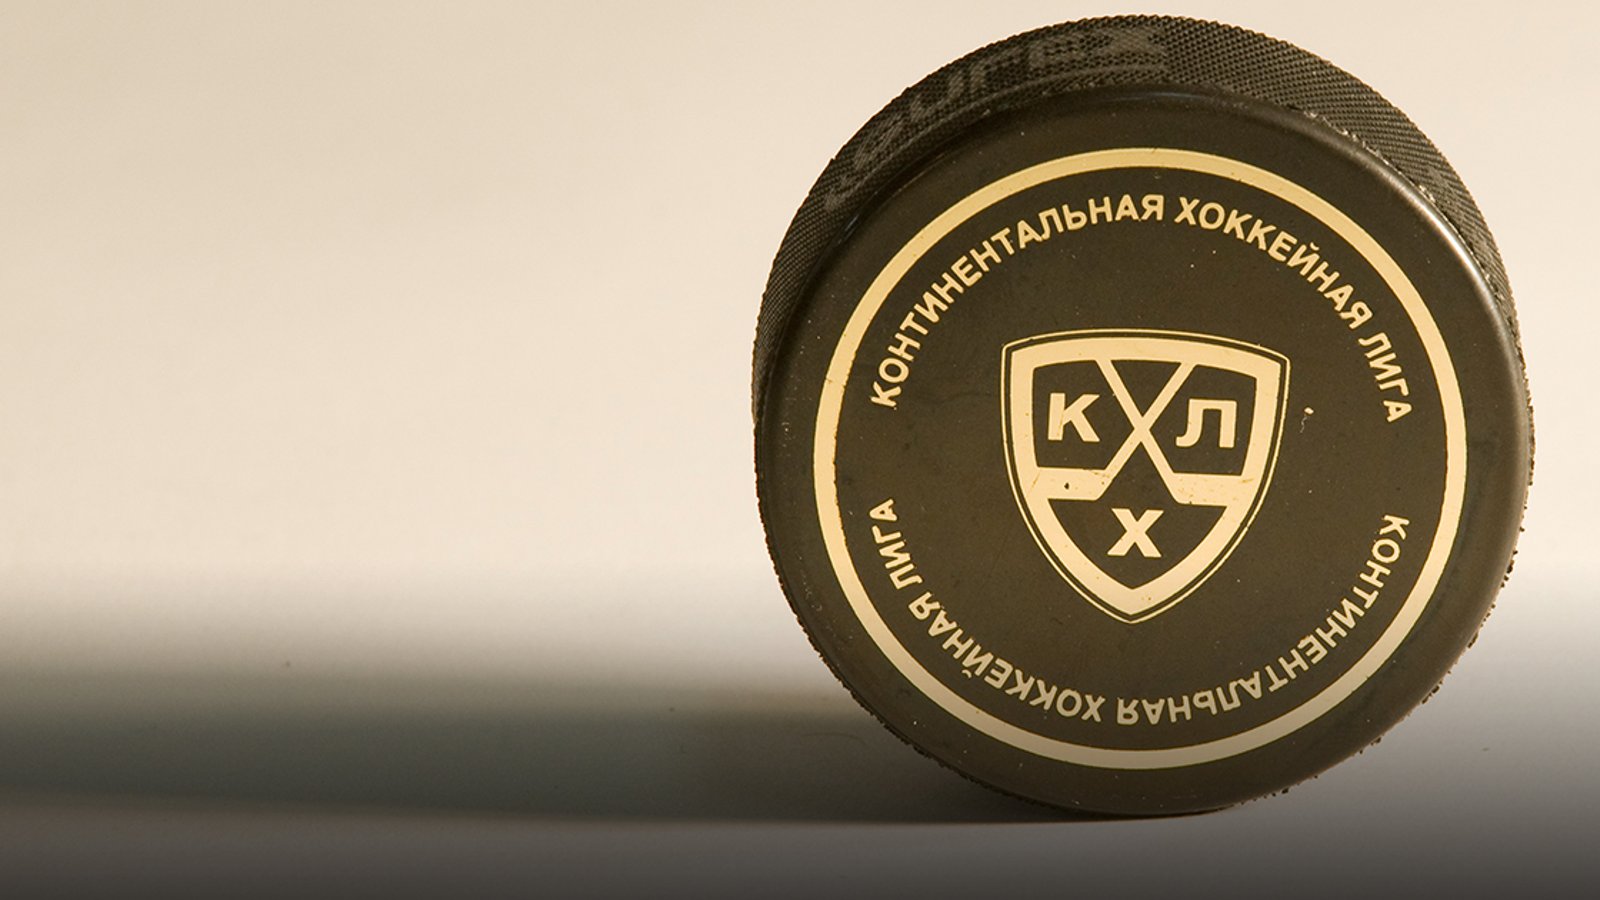 NHL veteran and former 7th overall pick bolts for KHL